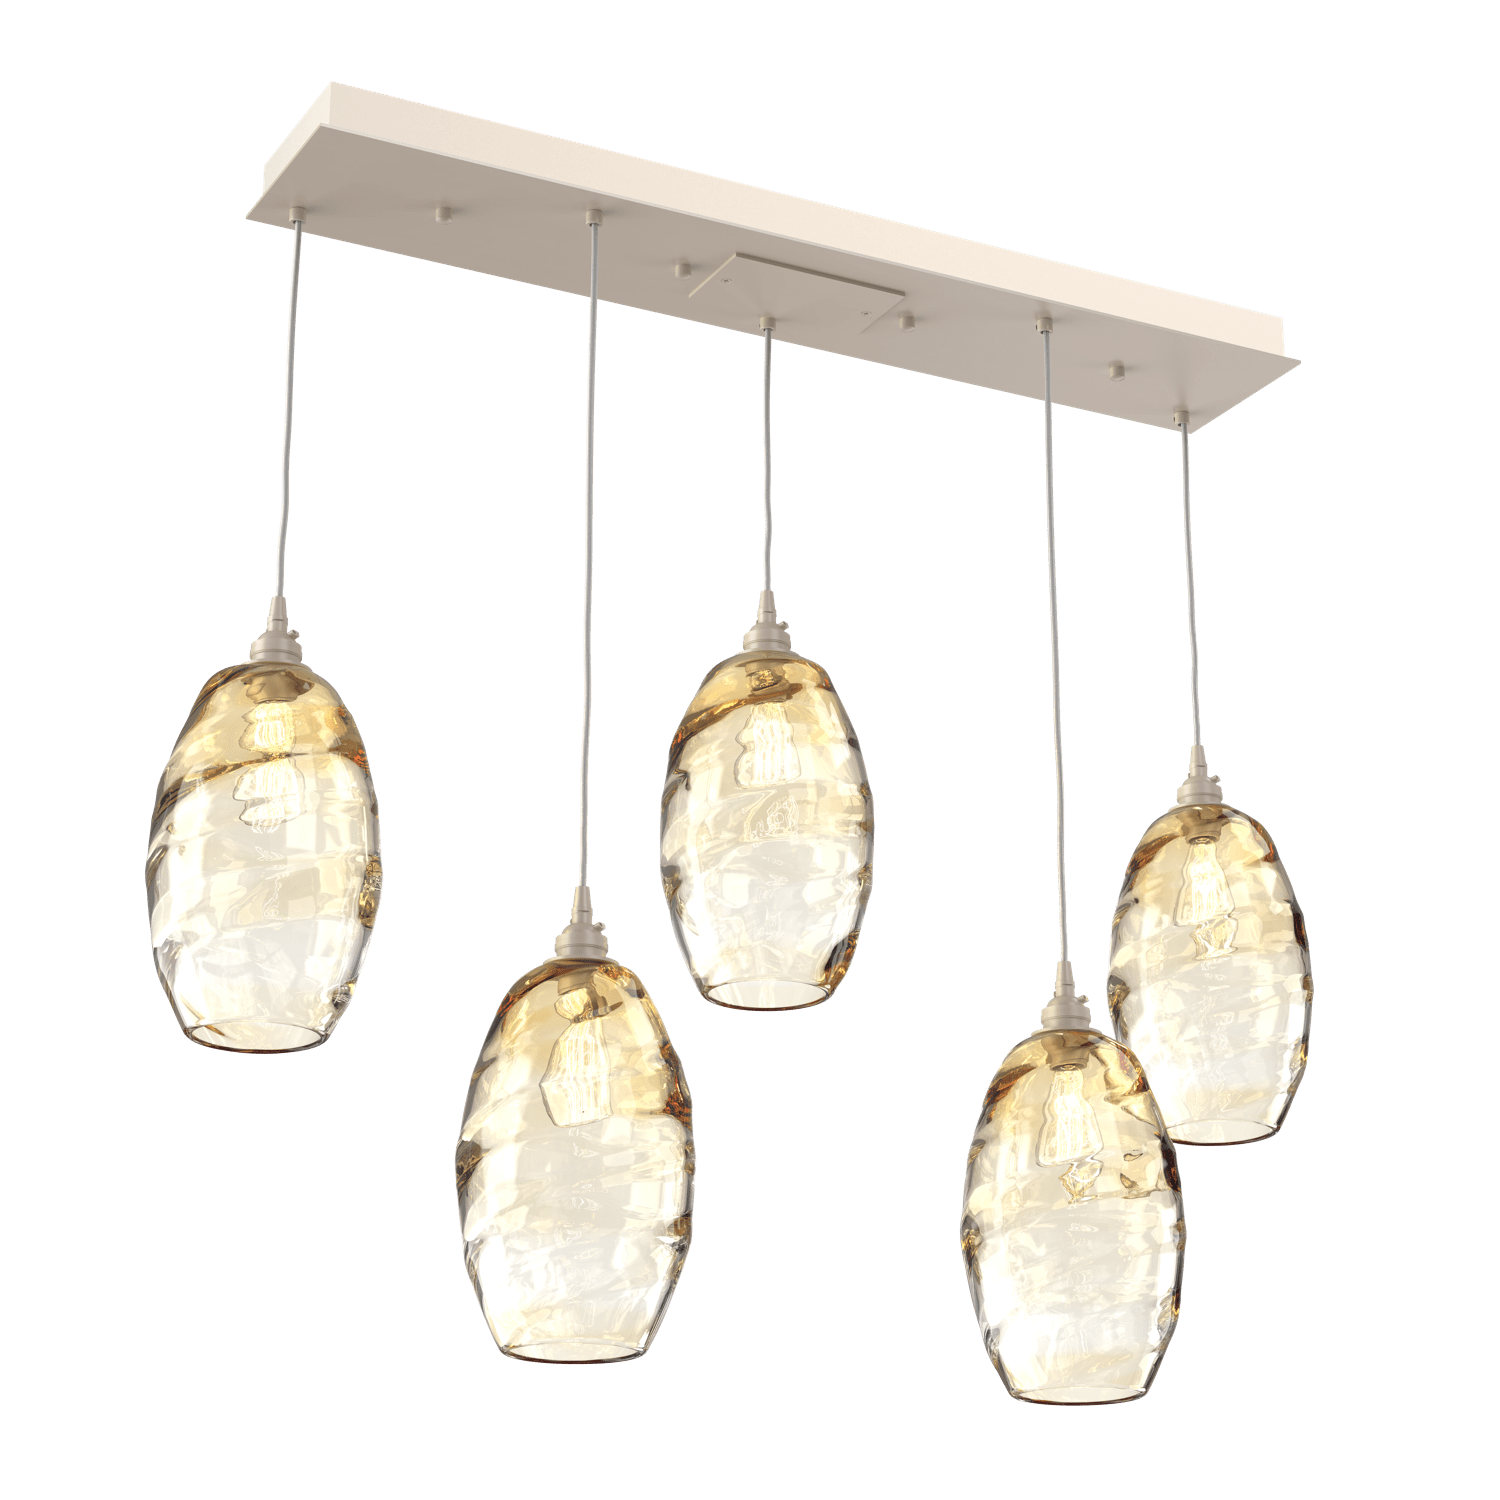 PLB0035-05-BS-OA-Hammerton-Studio-Optic-Blown-Glass-Elisse-5-light-linear-pendant-chandelier-with-metallic-beige-silver-finish-and-optic-amber-blown-glass-shades-and-incandescent-lamping